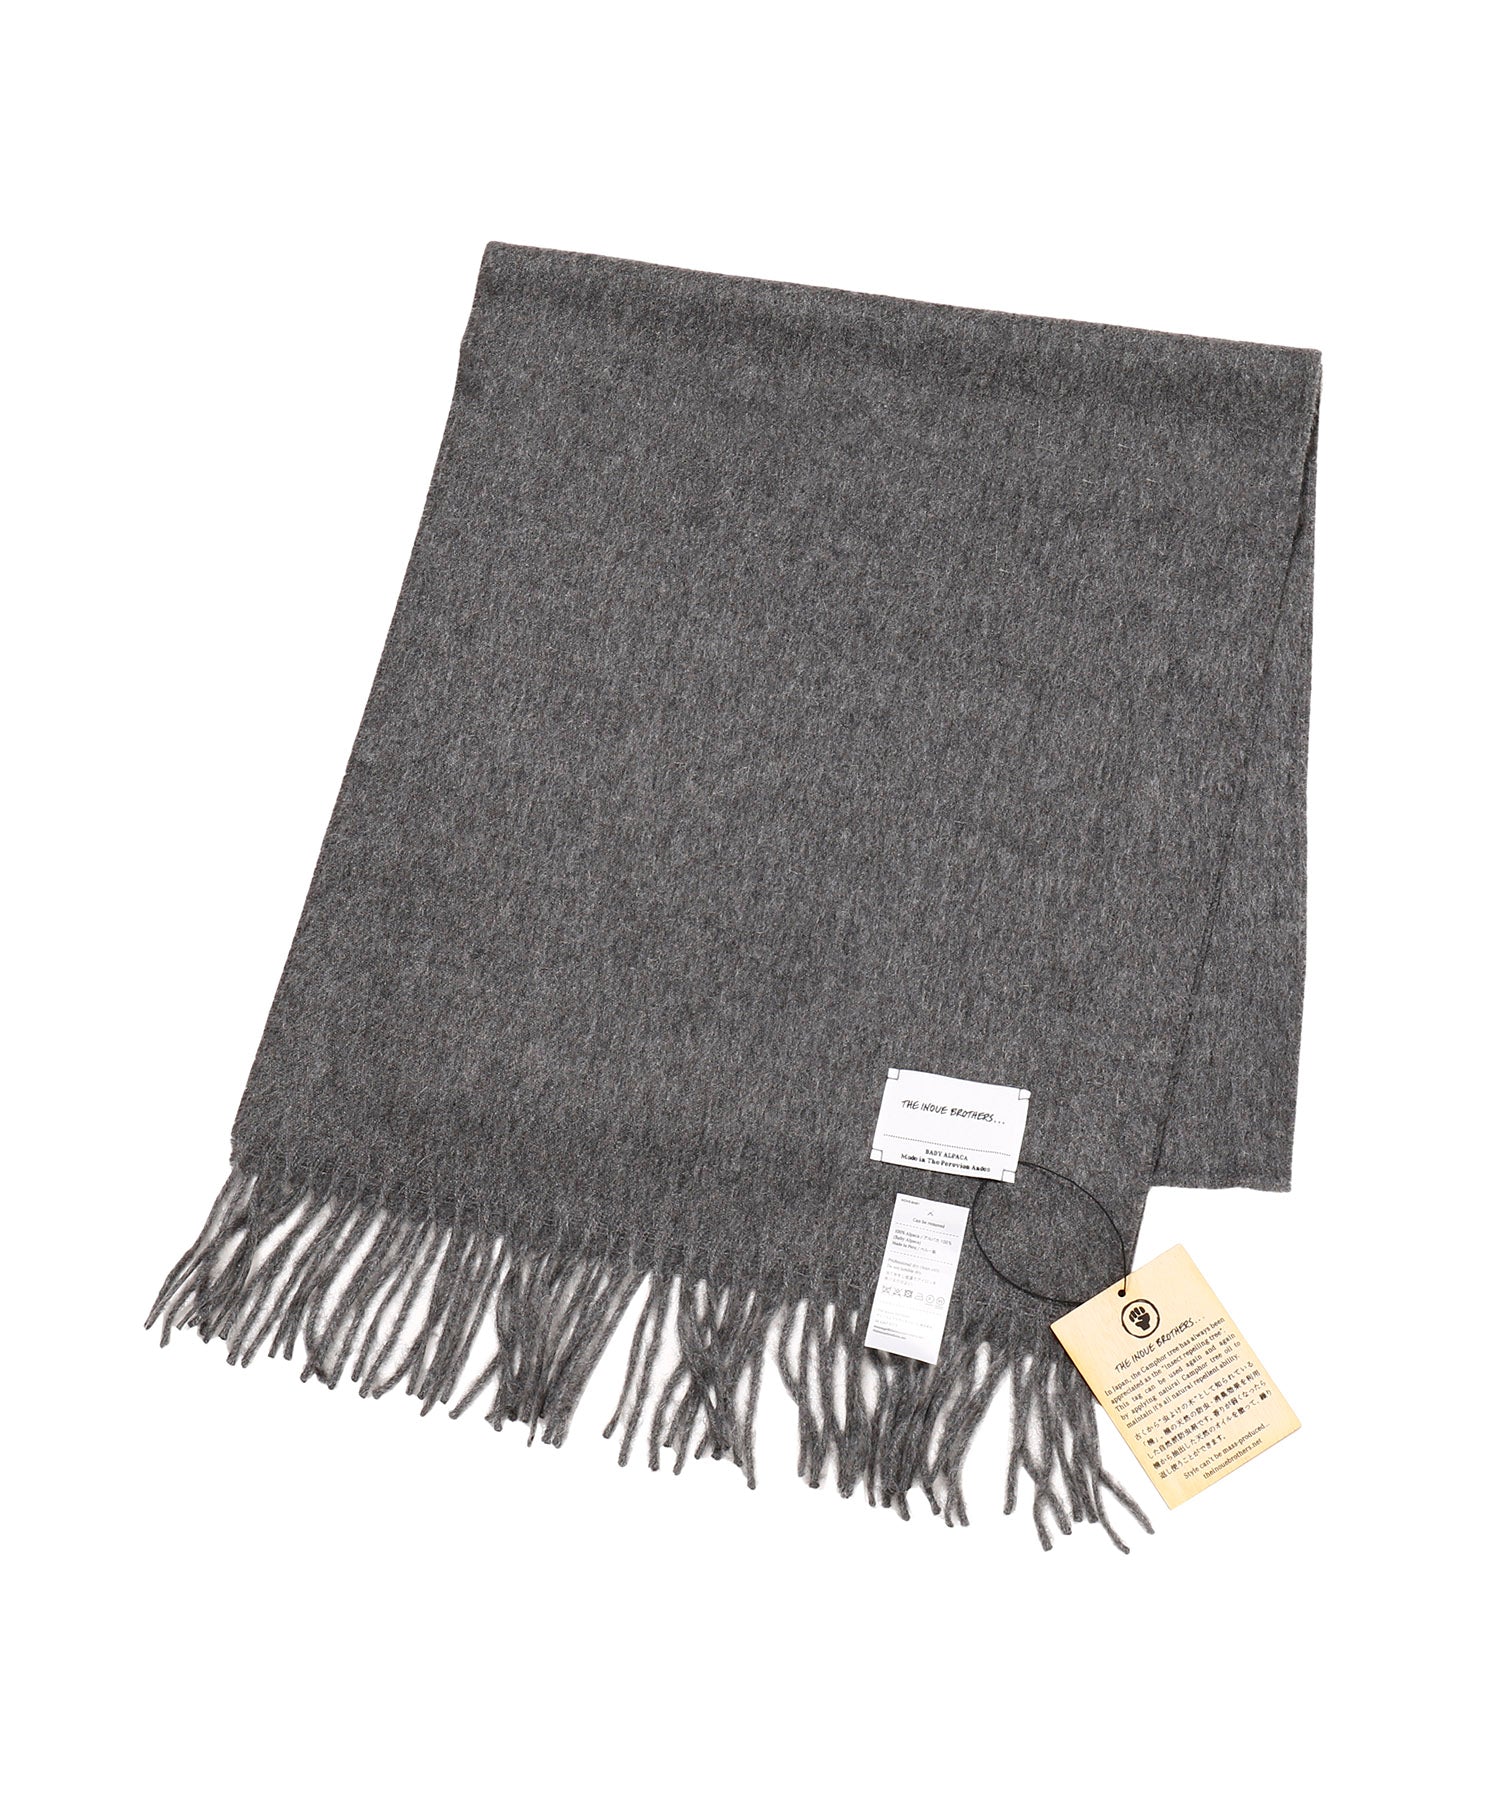 THE INOUE BROTHERS Brushed Scarf LT.GREY - マフラー